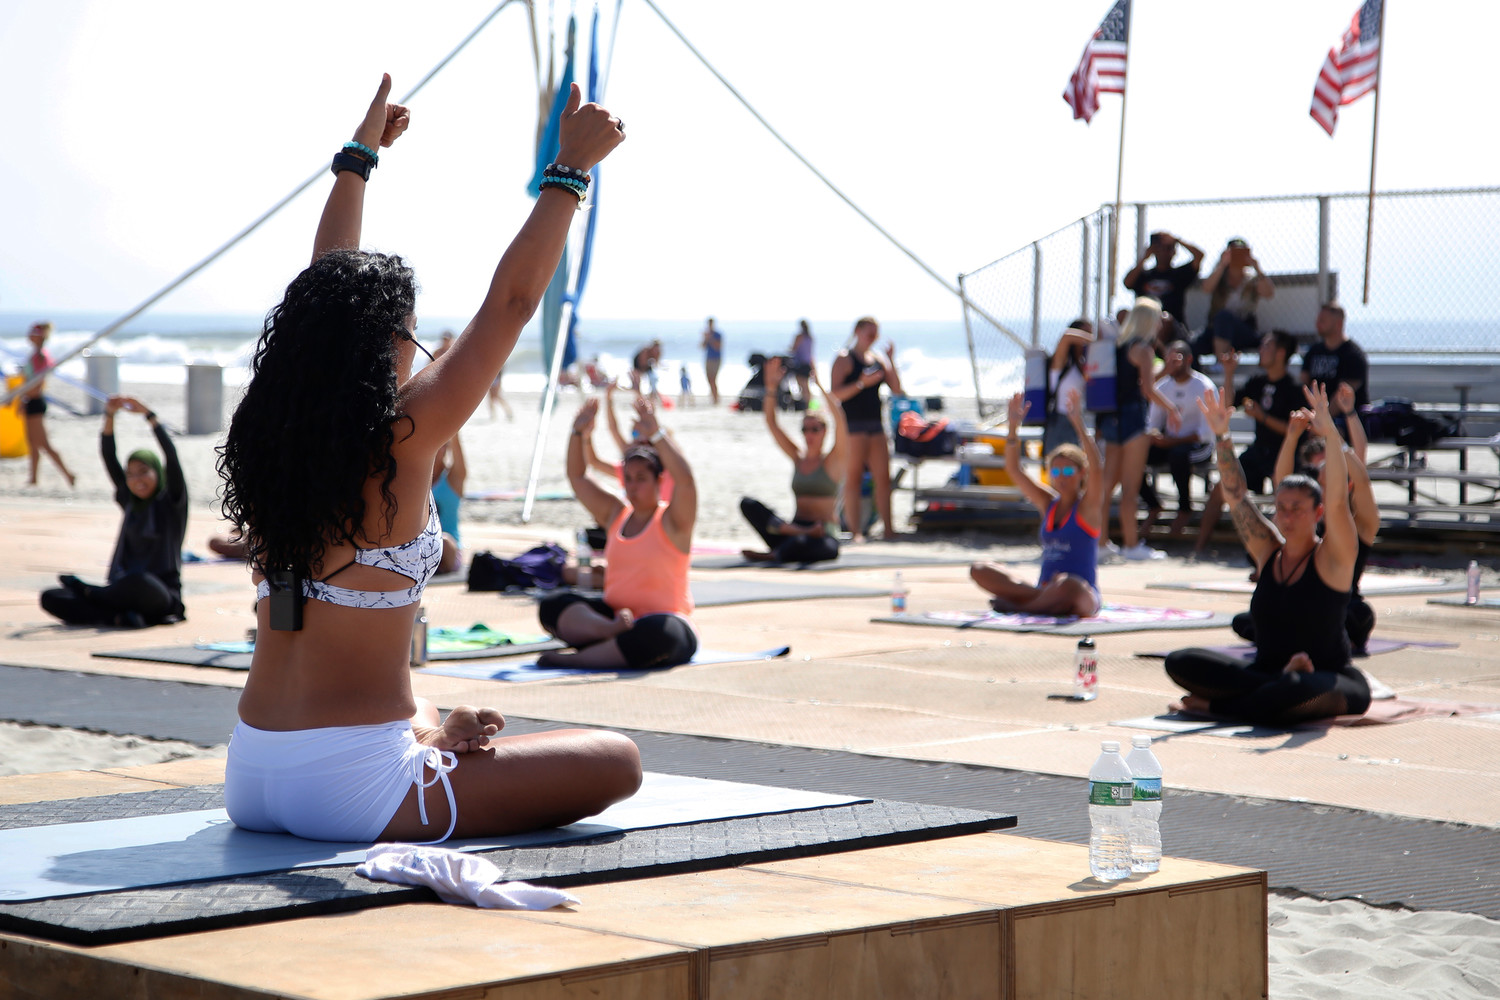 Buti Yoga instructor Gladys Duarte conducted a class on the beach at NY Fit Fest.